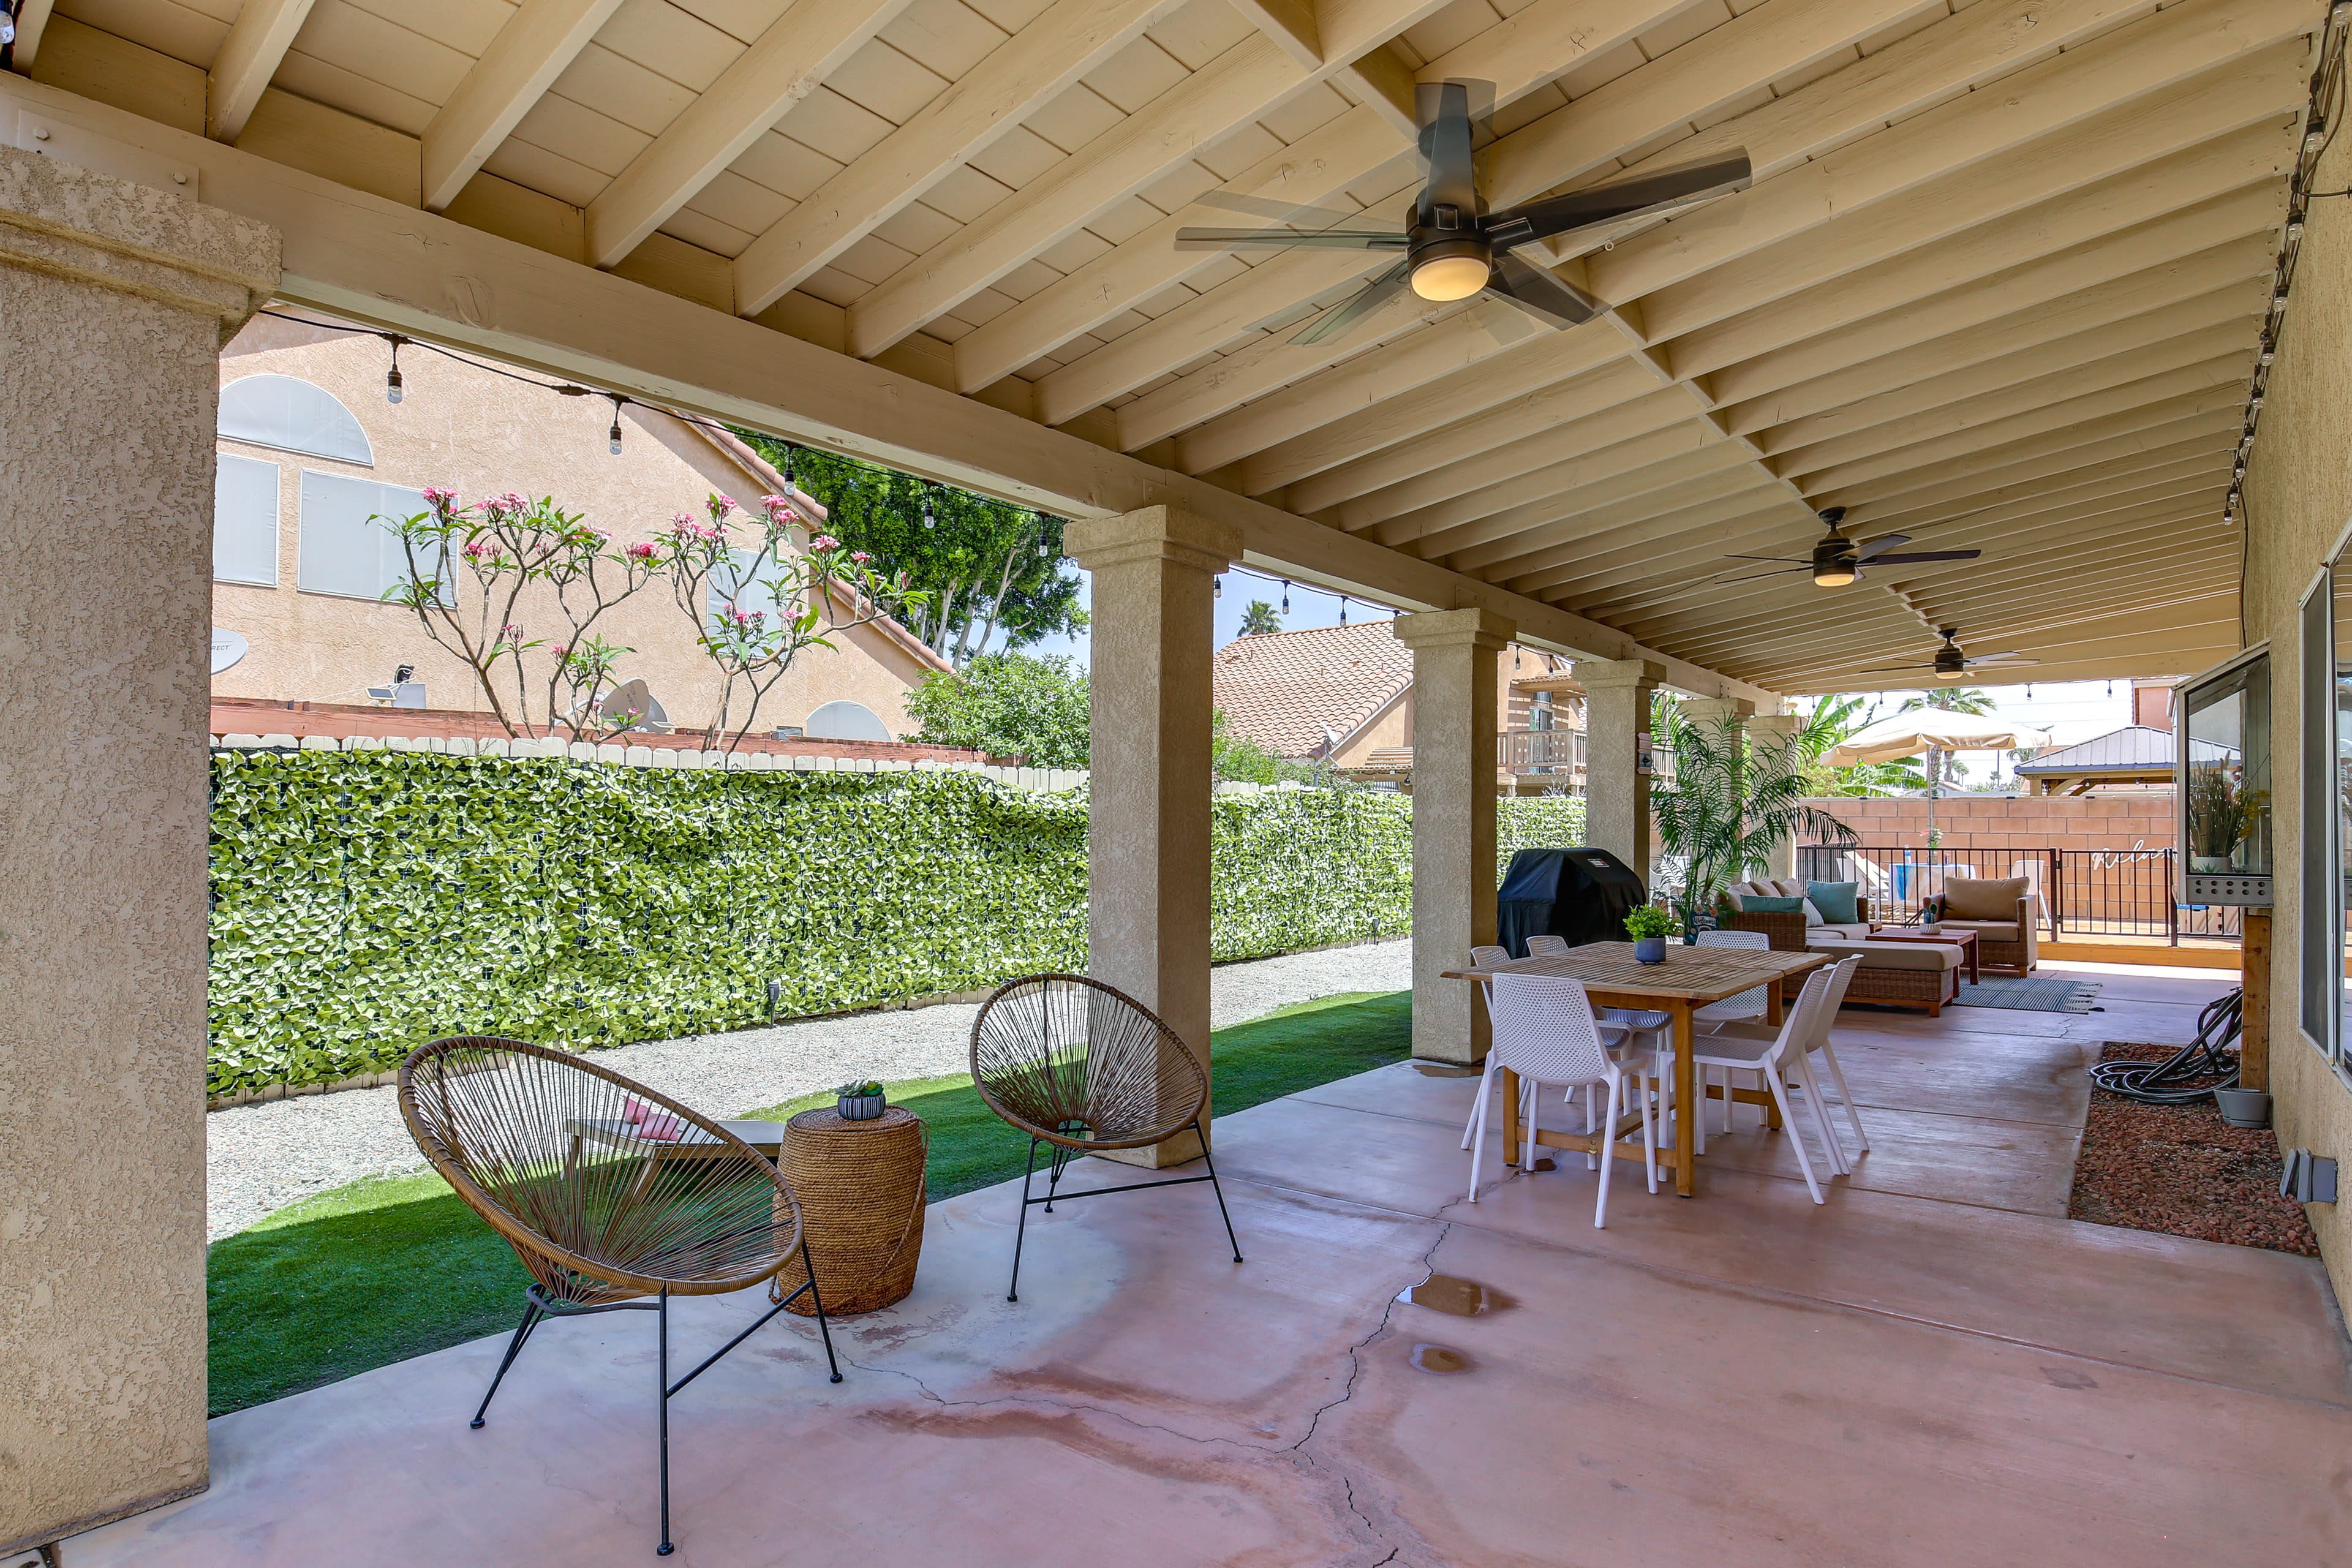 Covered Patio | Outdoor Dining Area | Gas Grill | Patio Furnishings